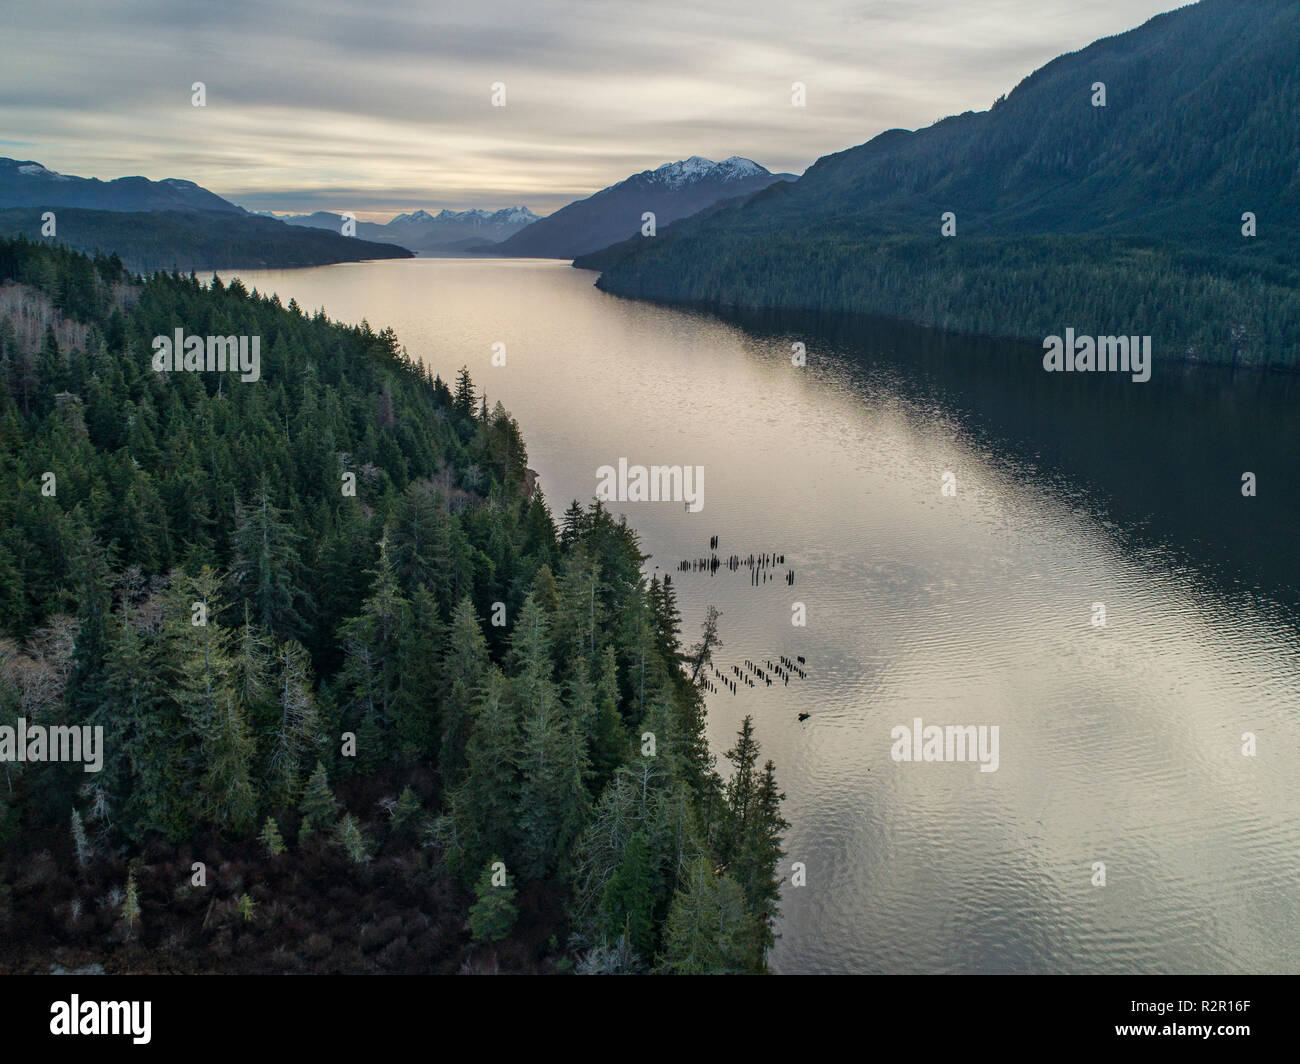 Drone image aerial view of Nimpkish Lake in Nimpkish Valley, northern Vancouver Island, British Columbia, Canada Stock Photo